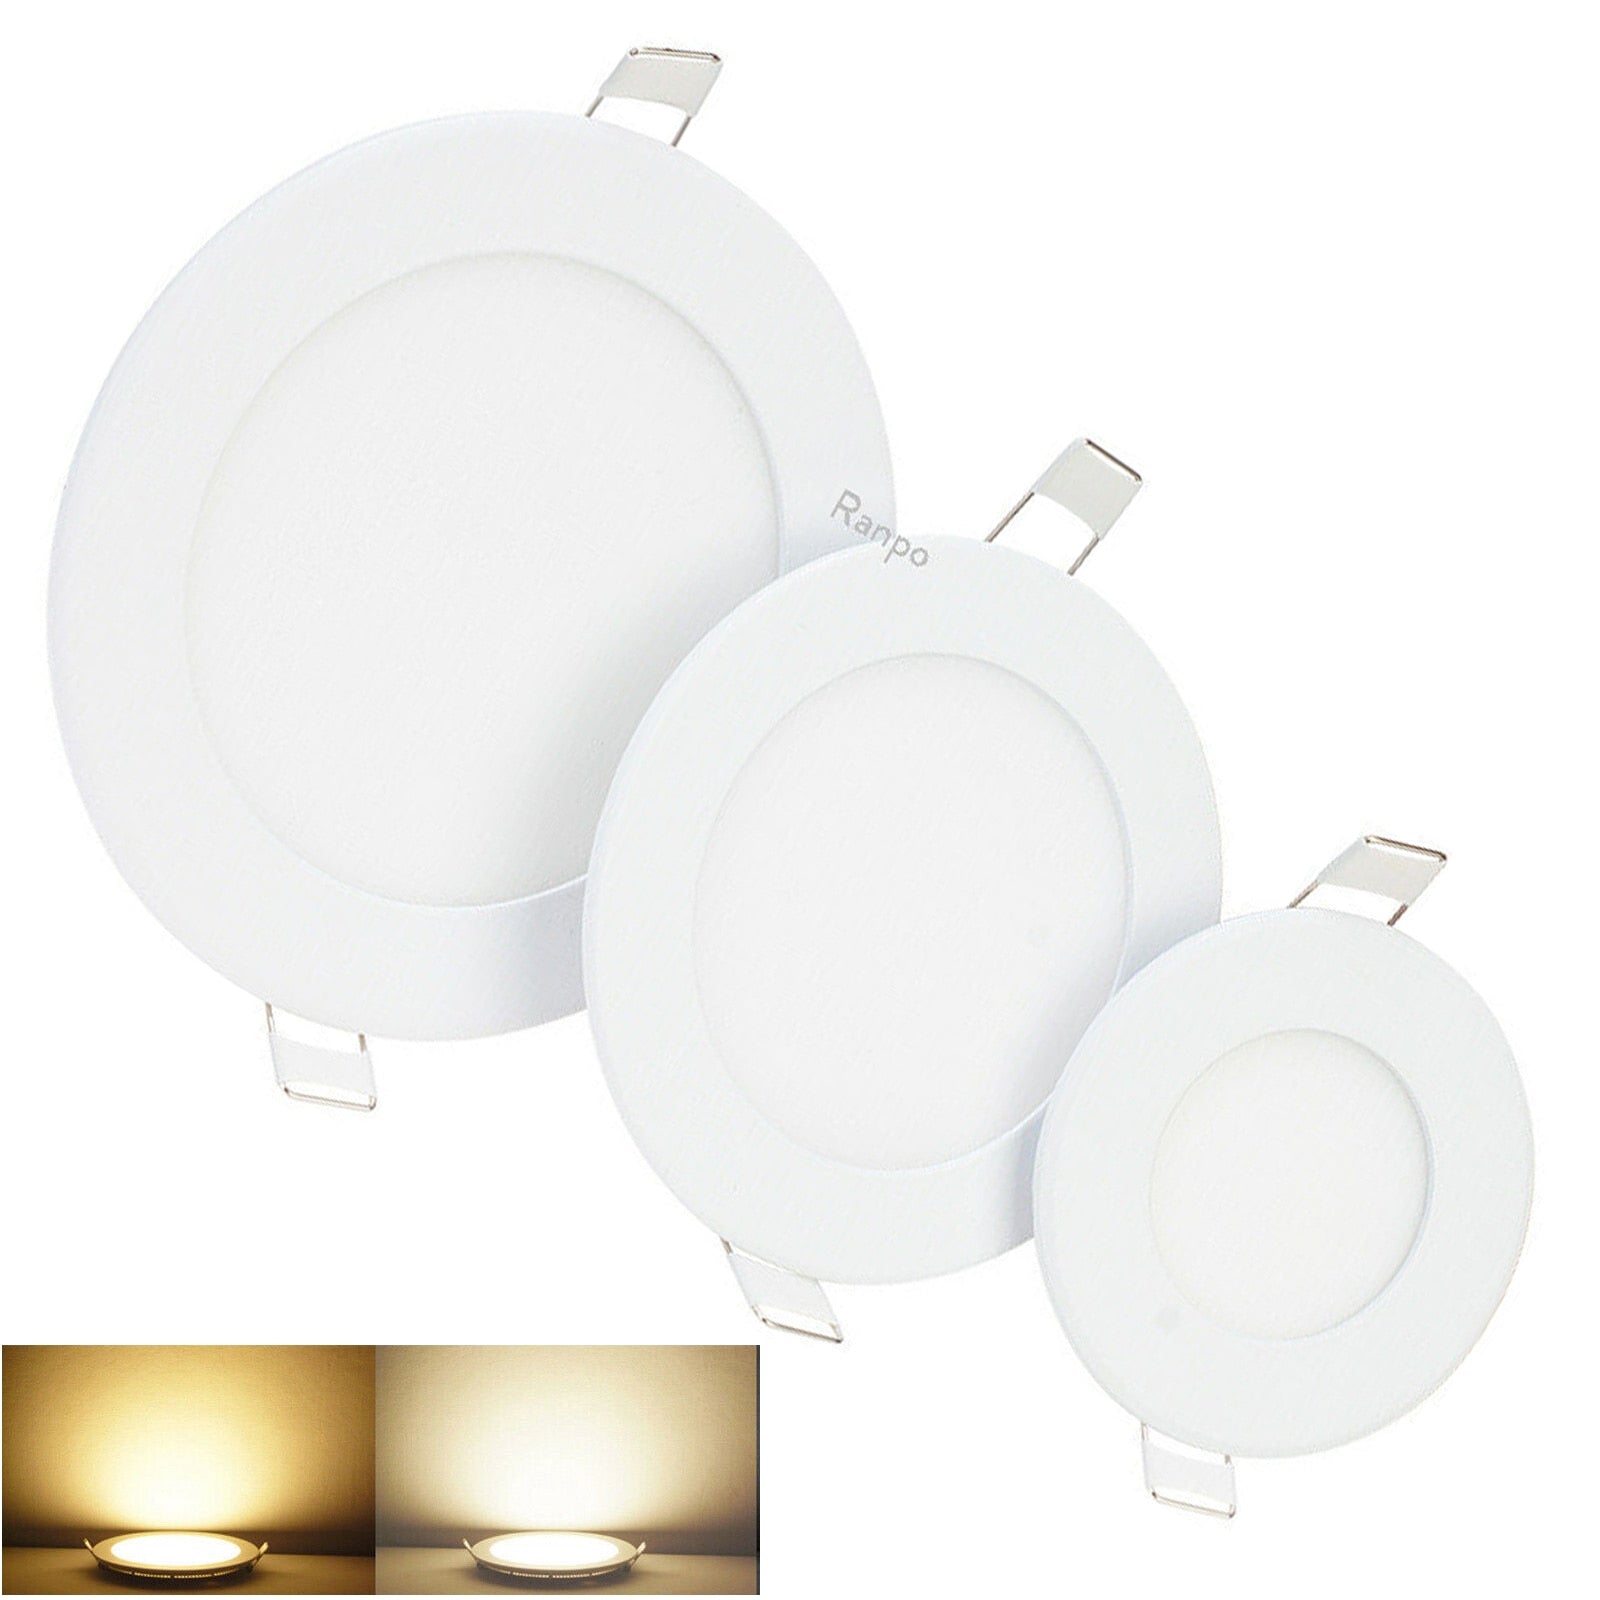 Round LED Panel Light Recessed Kitchen Bathroom Ceiling Lamp Dimmable 110V 220V 6W 9W LED Downlight Warm White Cool White Lamps